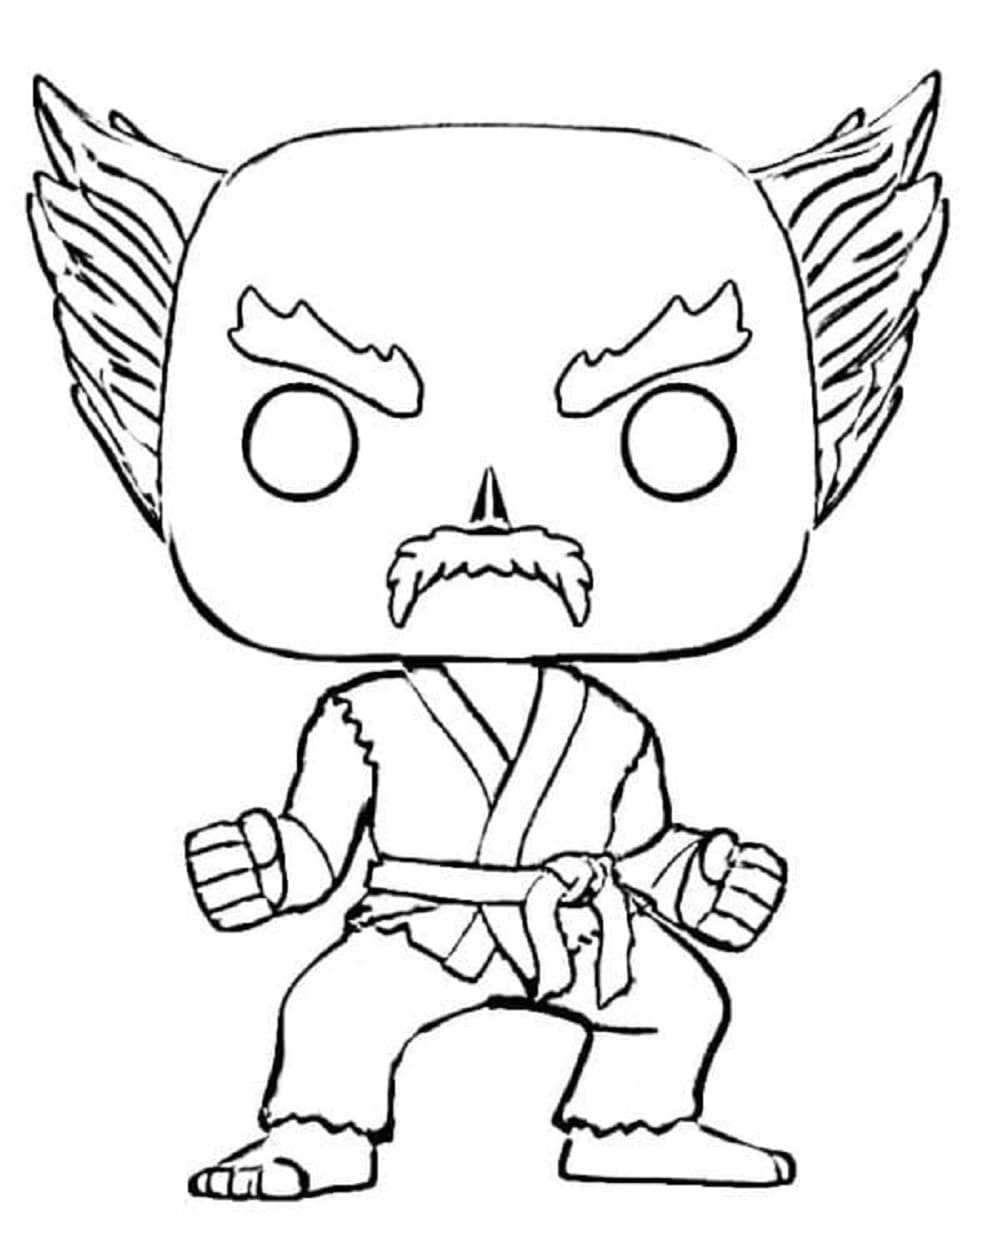 Free Printable Funko Pop Coloring Page